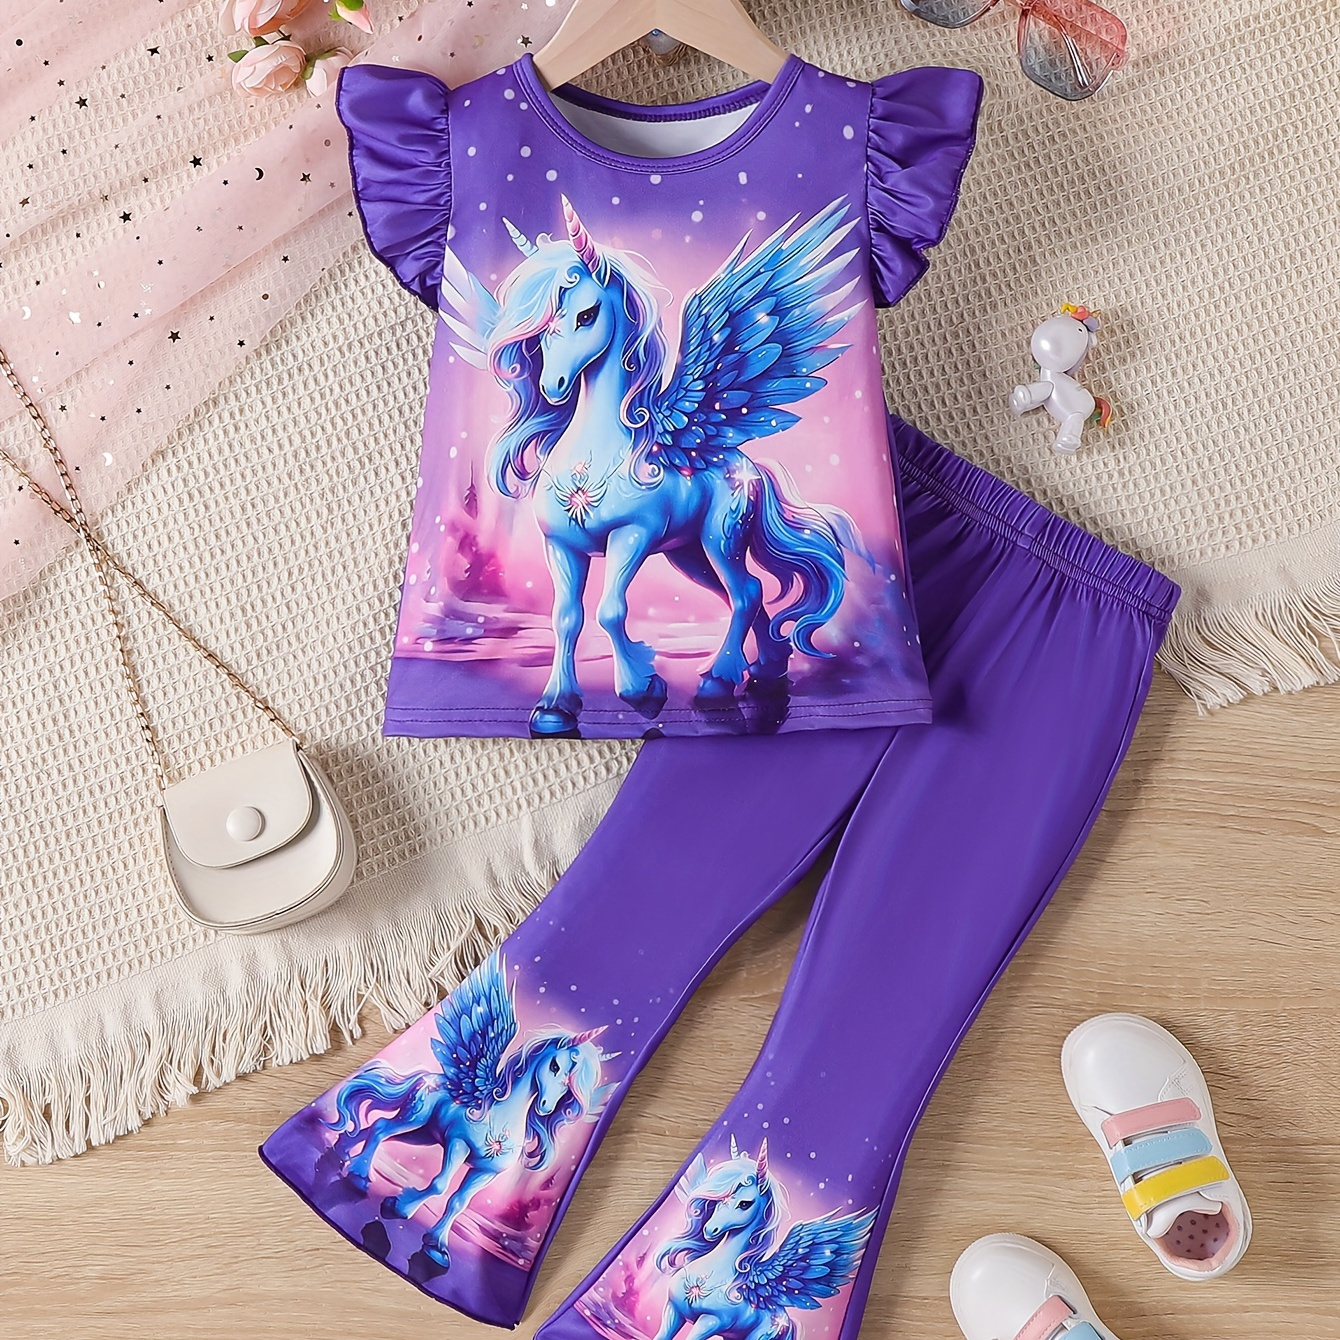 

Girl's Outfit Magical Unicorn Print Ruffle Sleeve Top + Flare Pants Set 2pcs Cute Girls Summer Clothes